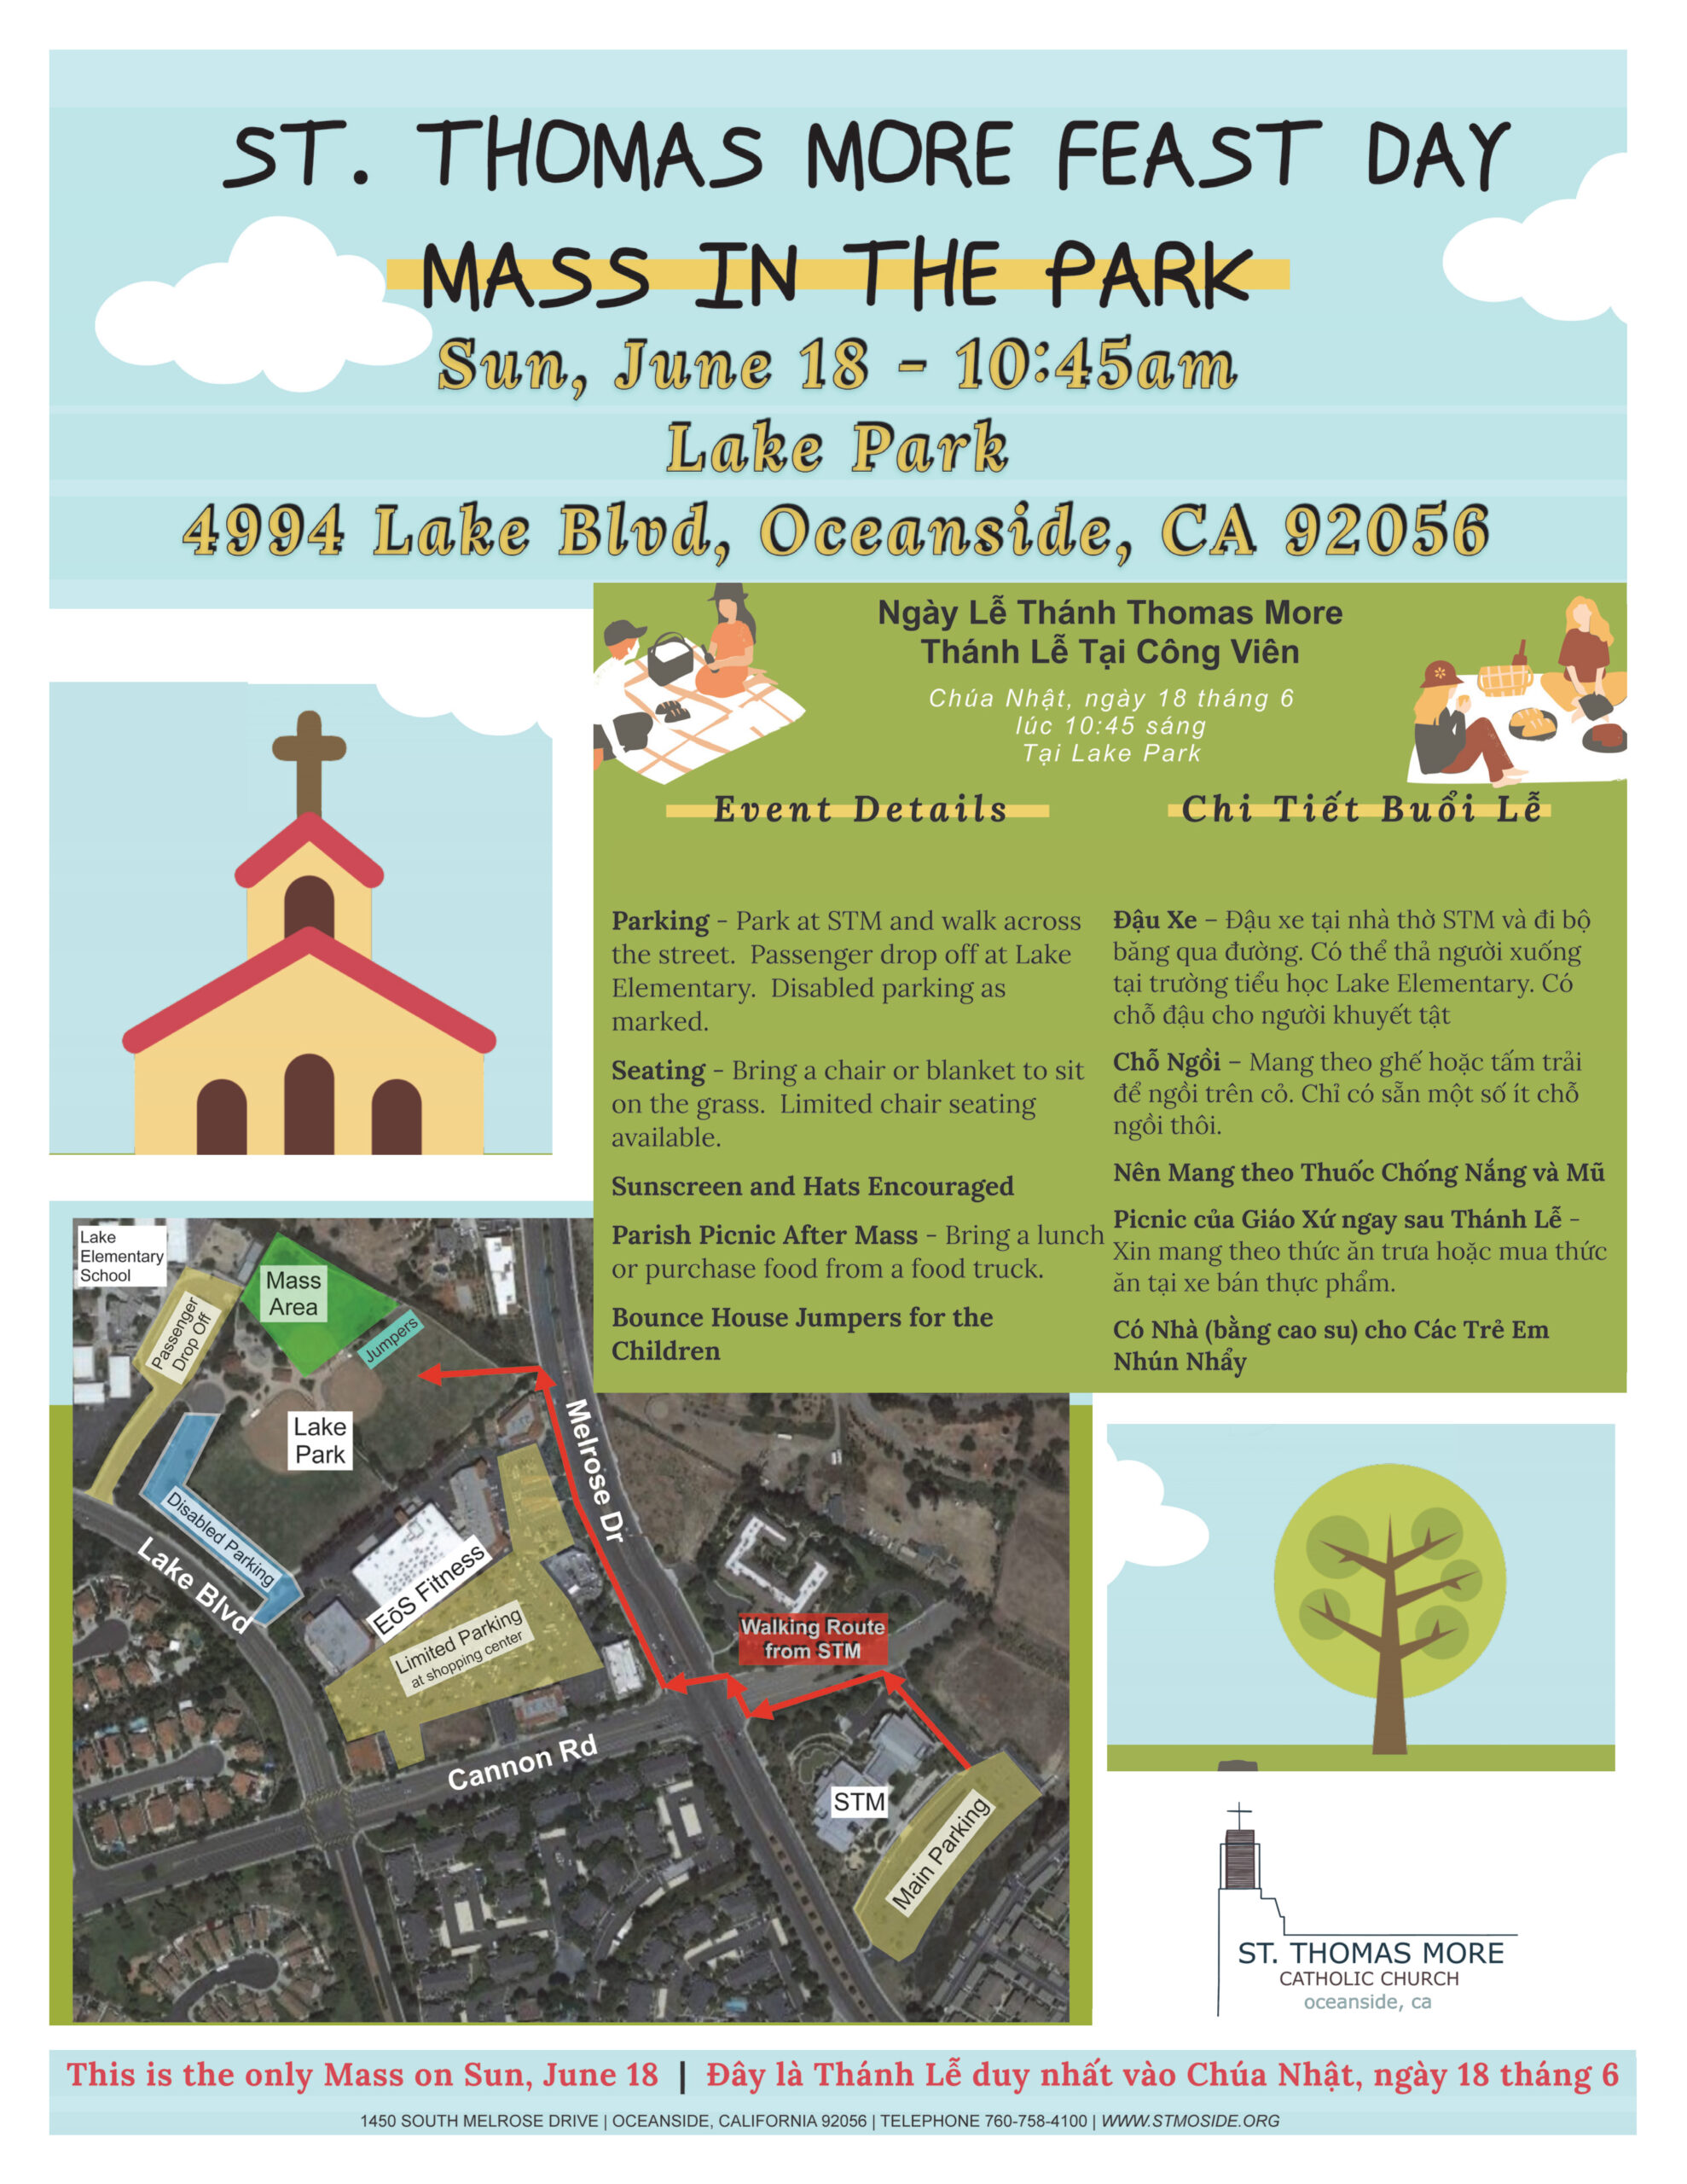 Mass in the Park, Sunday, June 18, 10:45am